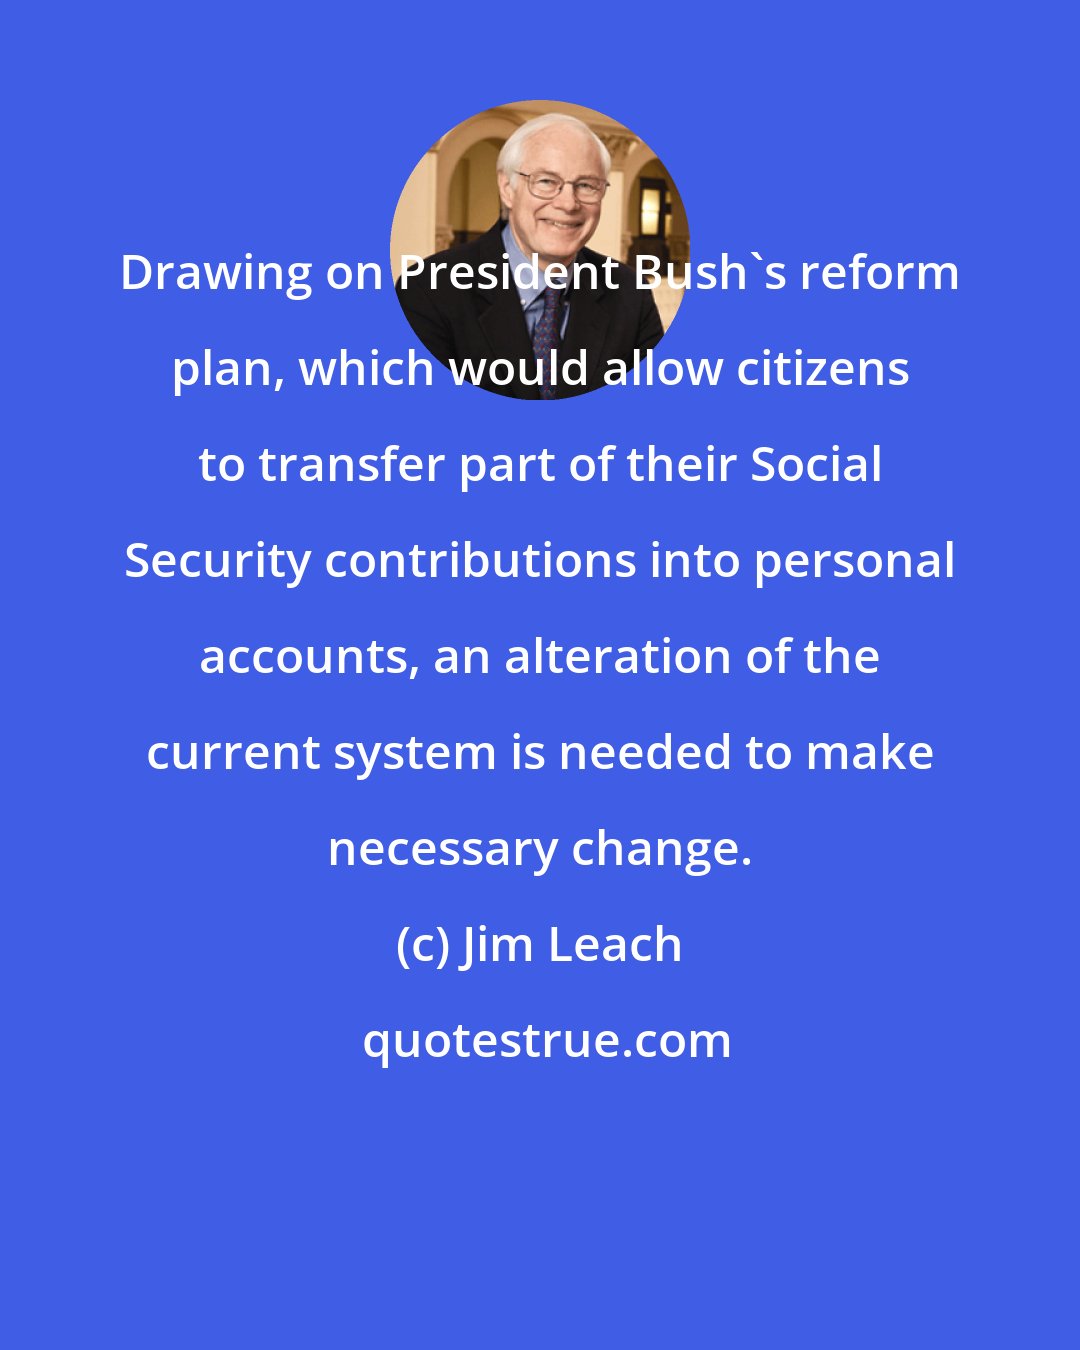 Jim Leach: Drawing on President Bush's reform plan, which would allow citizens to transfer part of their Social Security contributions into personal accounts, an alteration of the current system is needed to make necessary change.